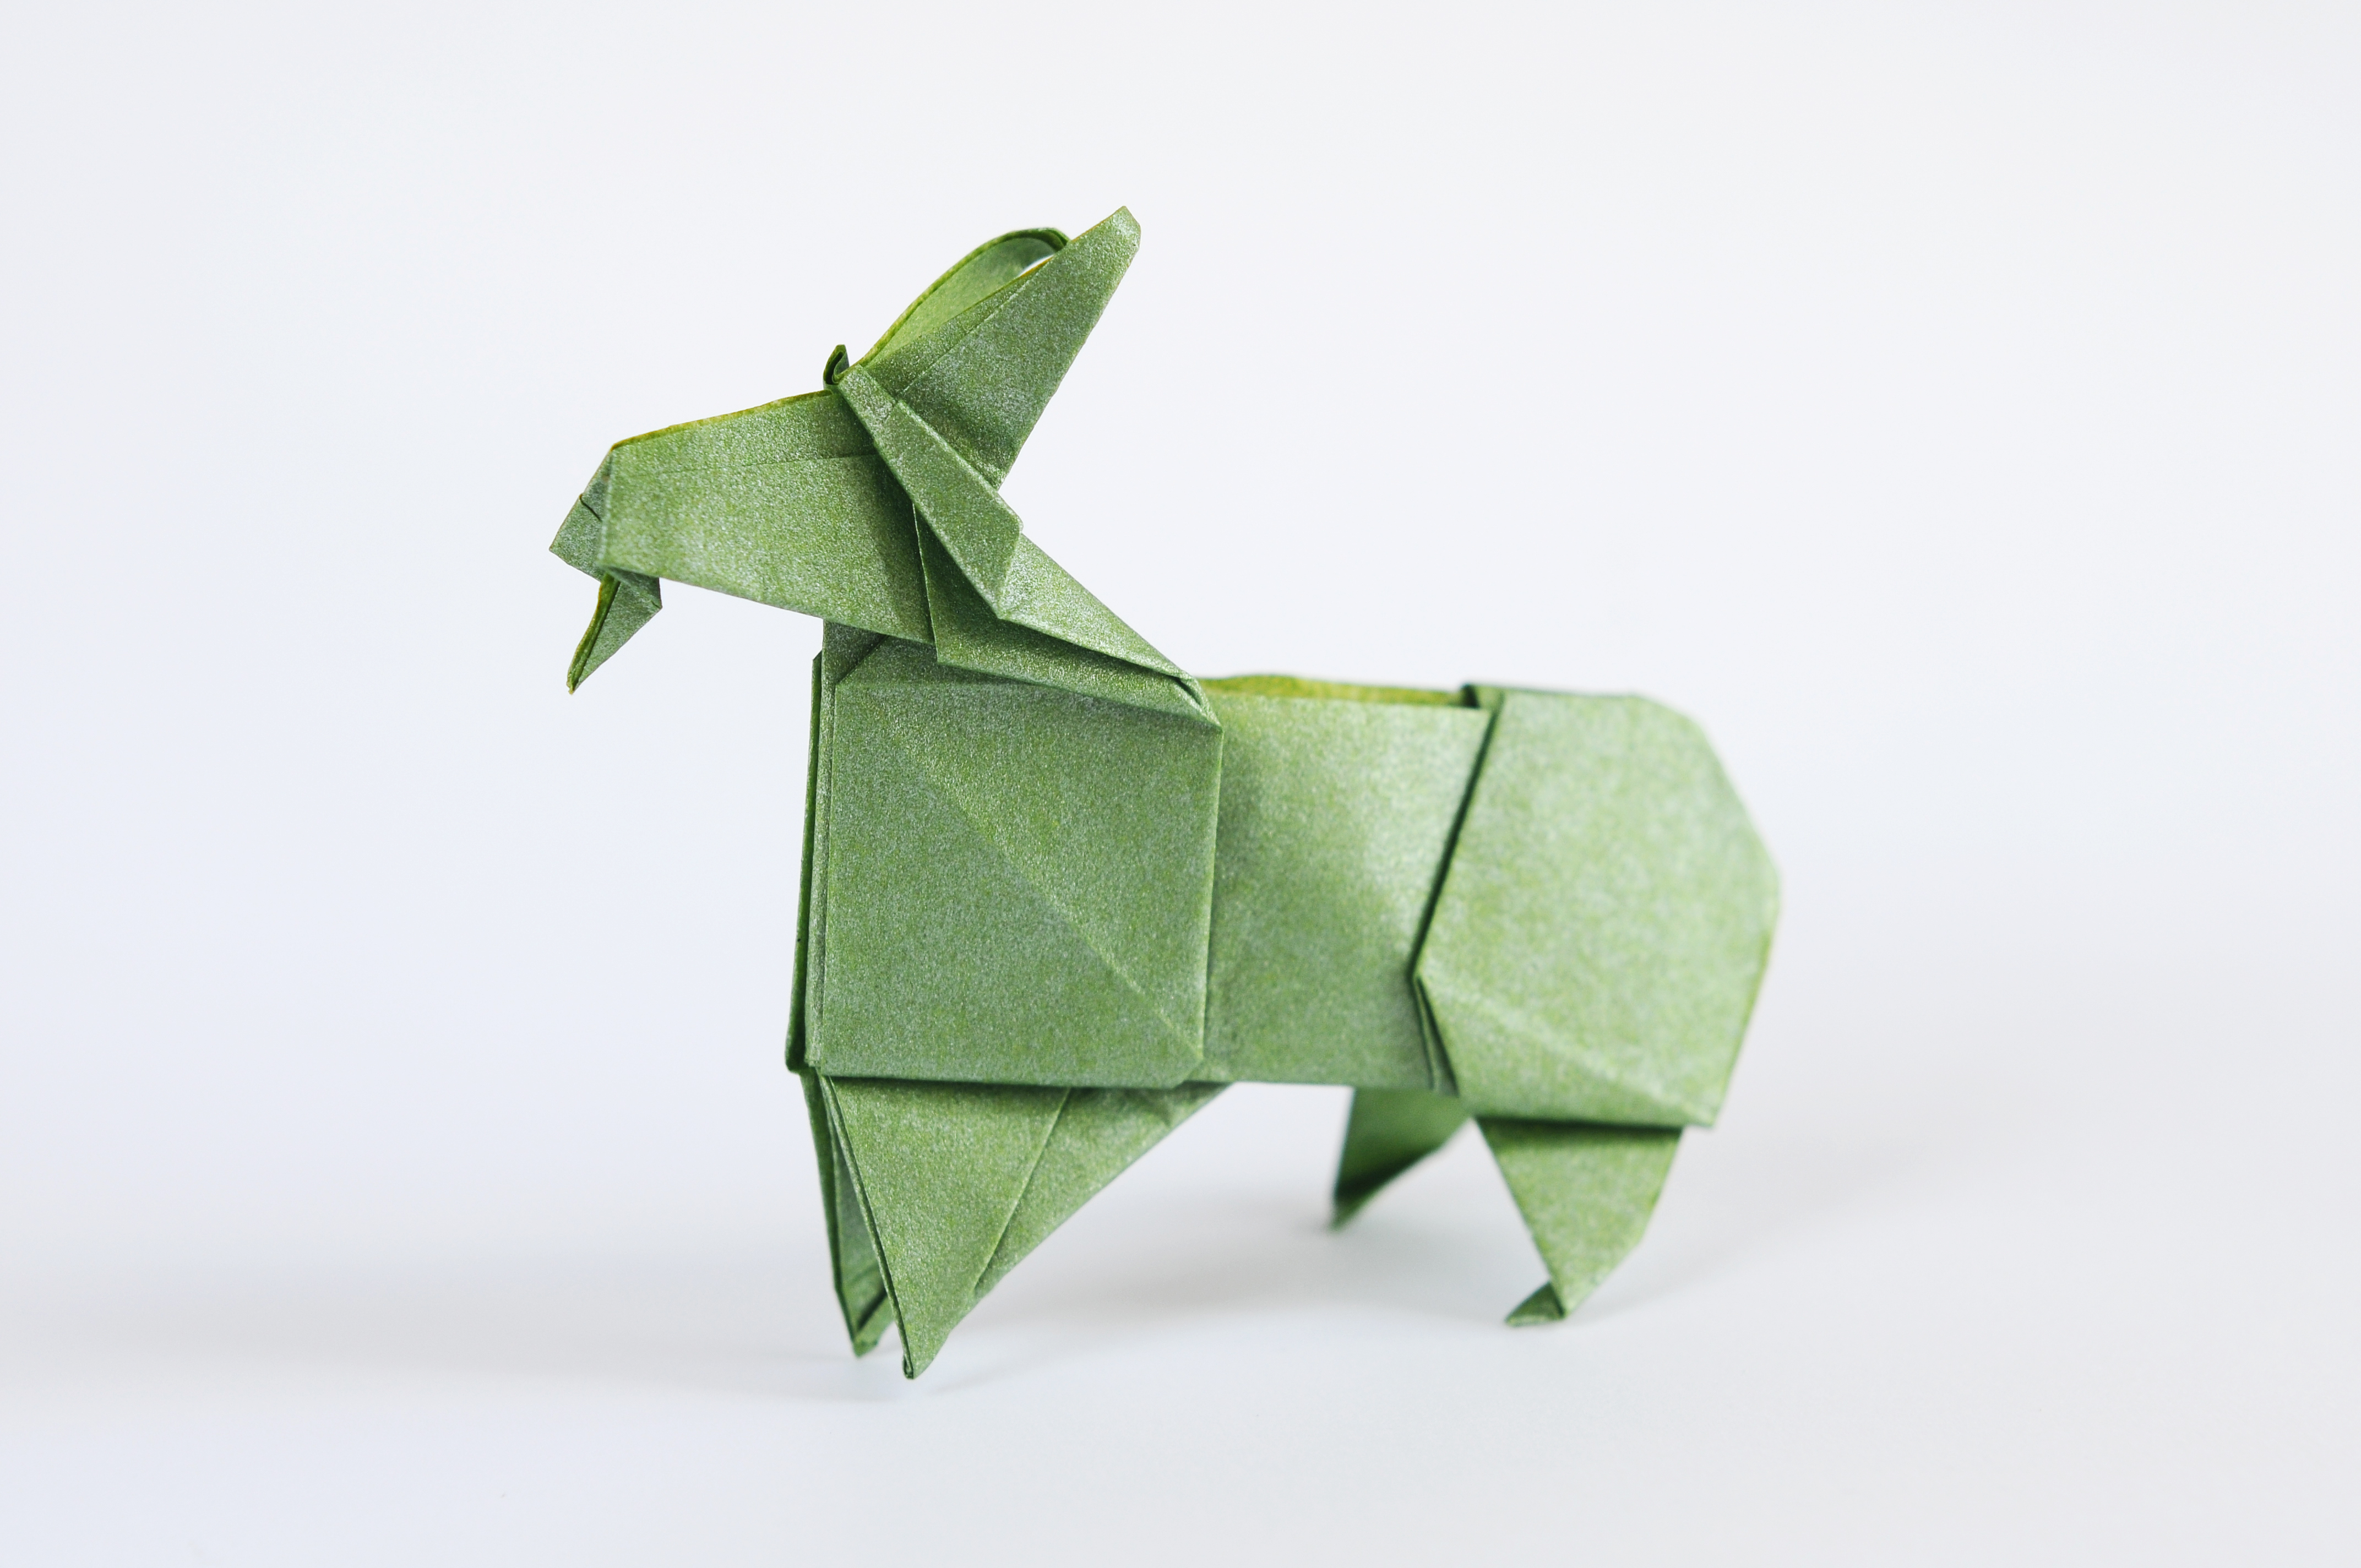 An origami goat. | Source: Getty Images